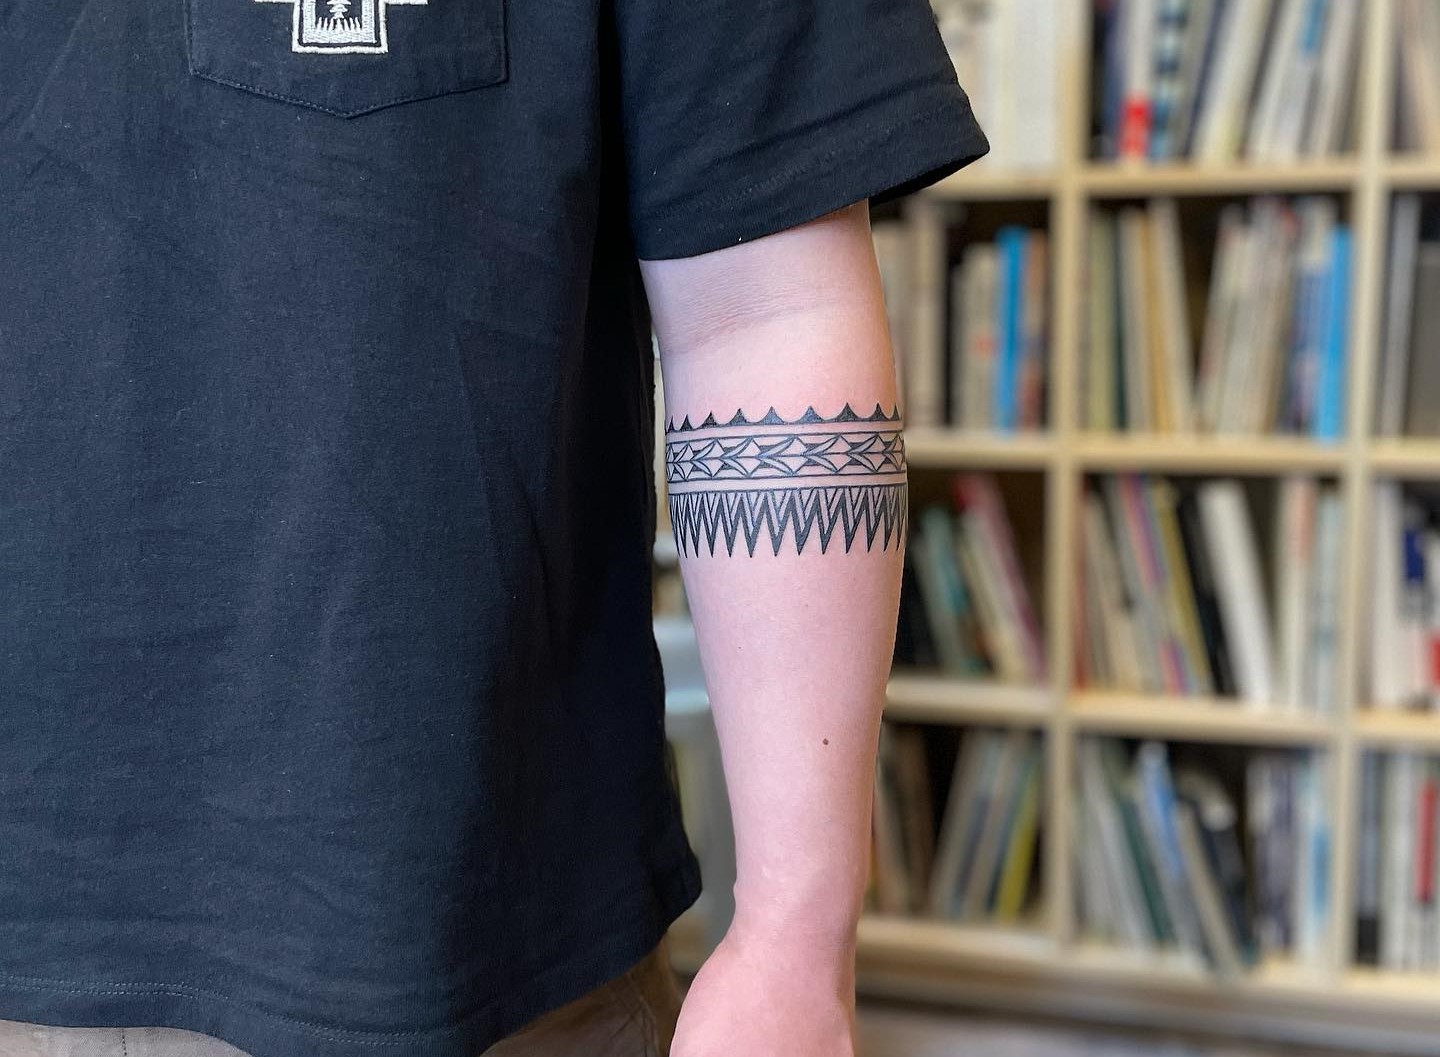 Neat geometric armband by marcdiamondtattoo If you'd like to book in with  Marc, send him a dm or fill out the tattoo enquiry form on our website ✨ ⋆  Studio XIII Gallery